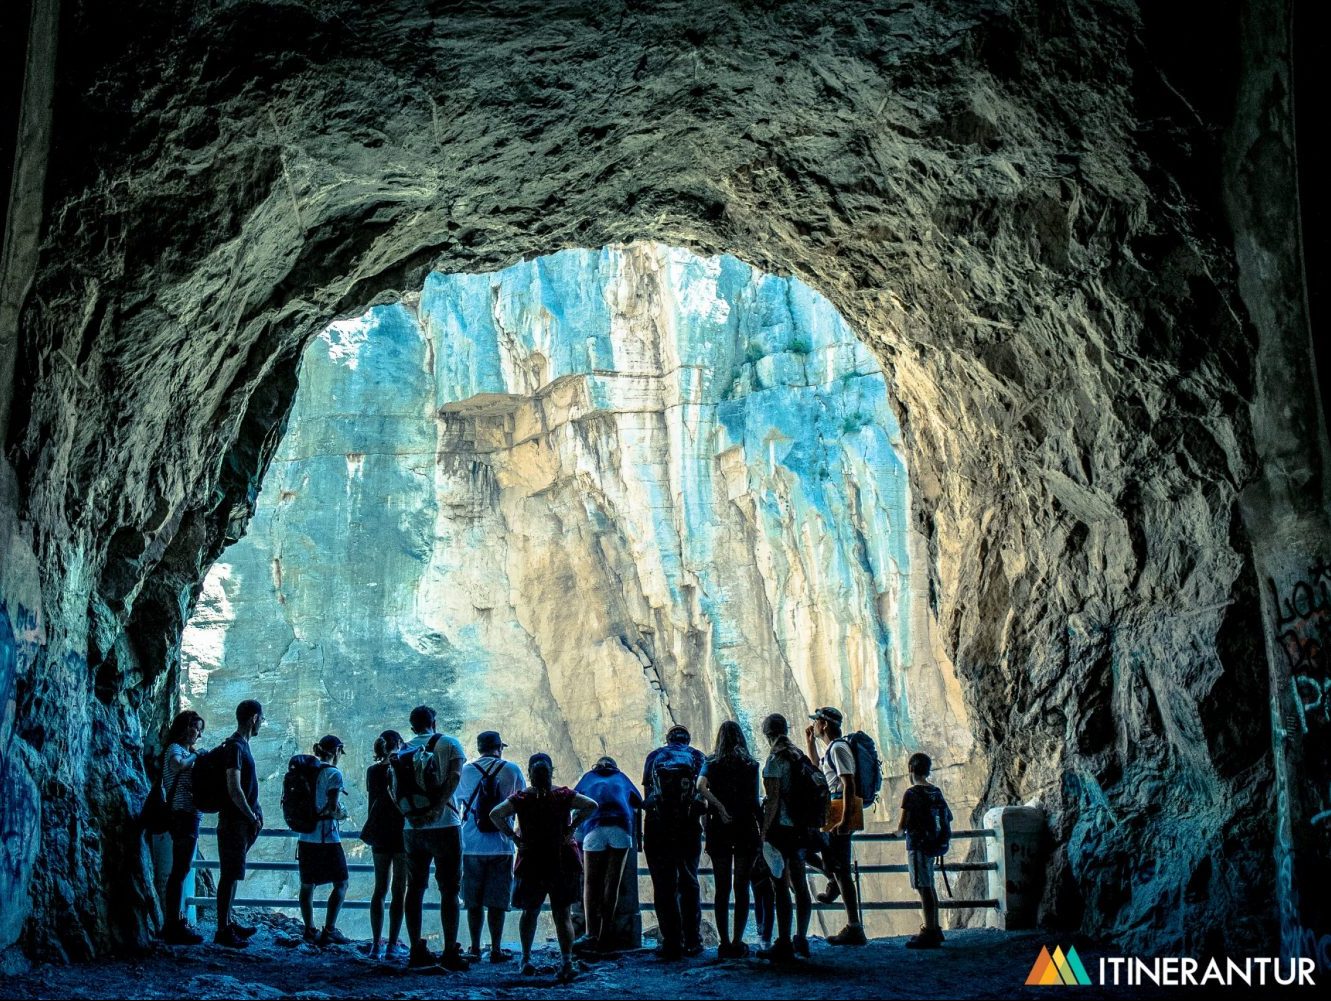 #WednesdayWisdom, a group of people underneath a cavern at Itinerantur.